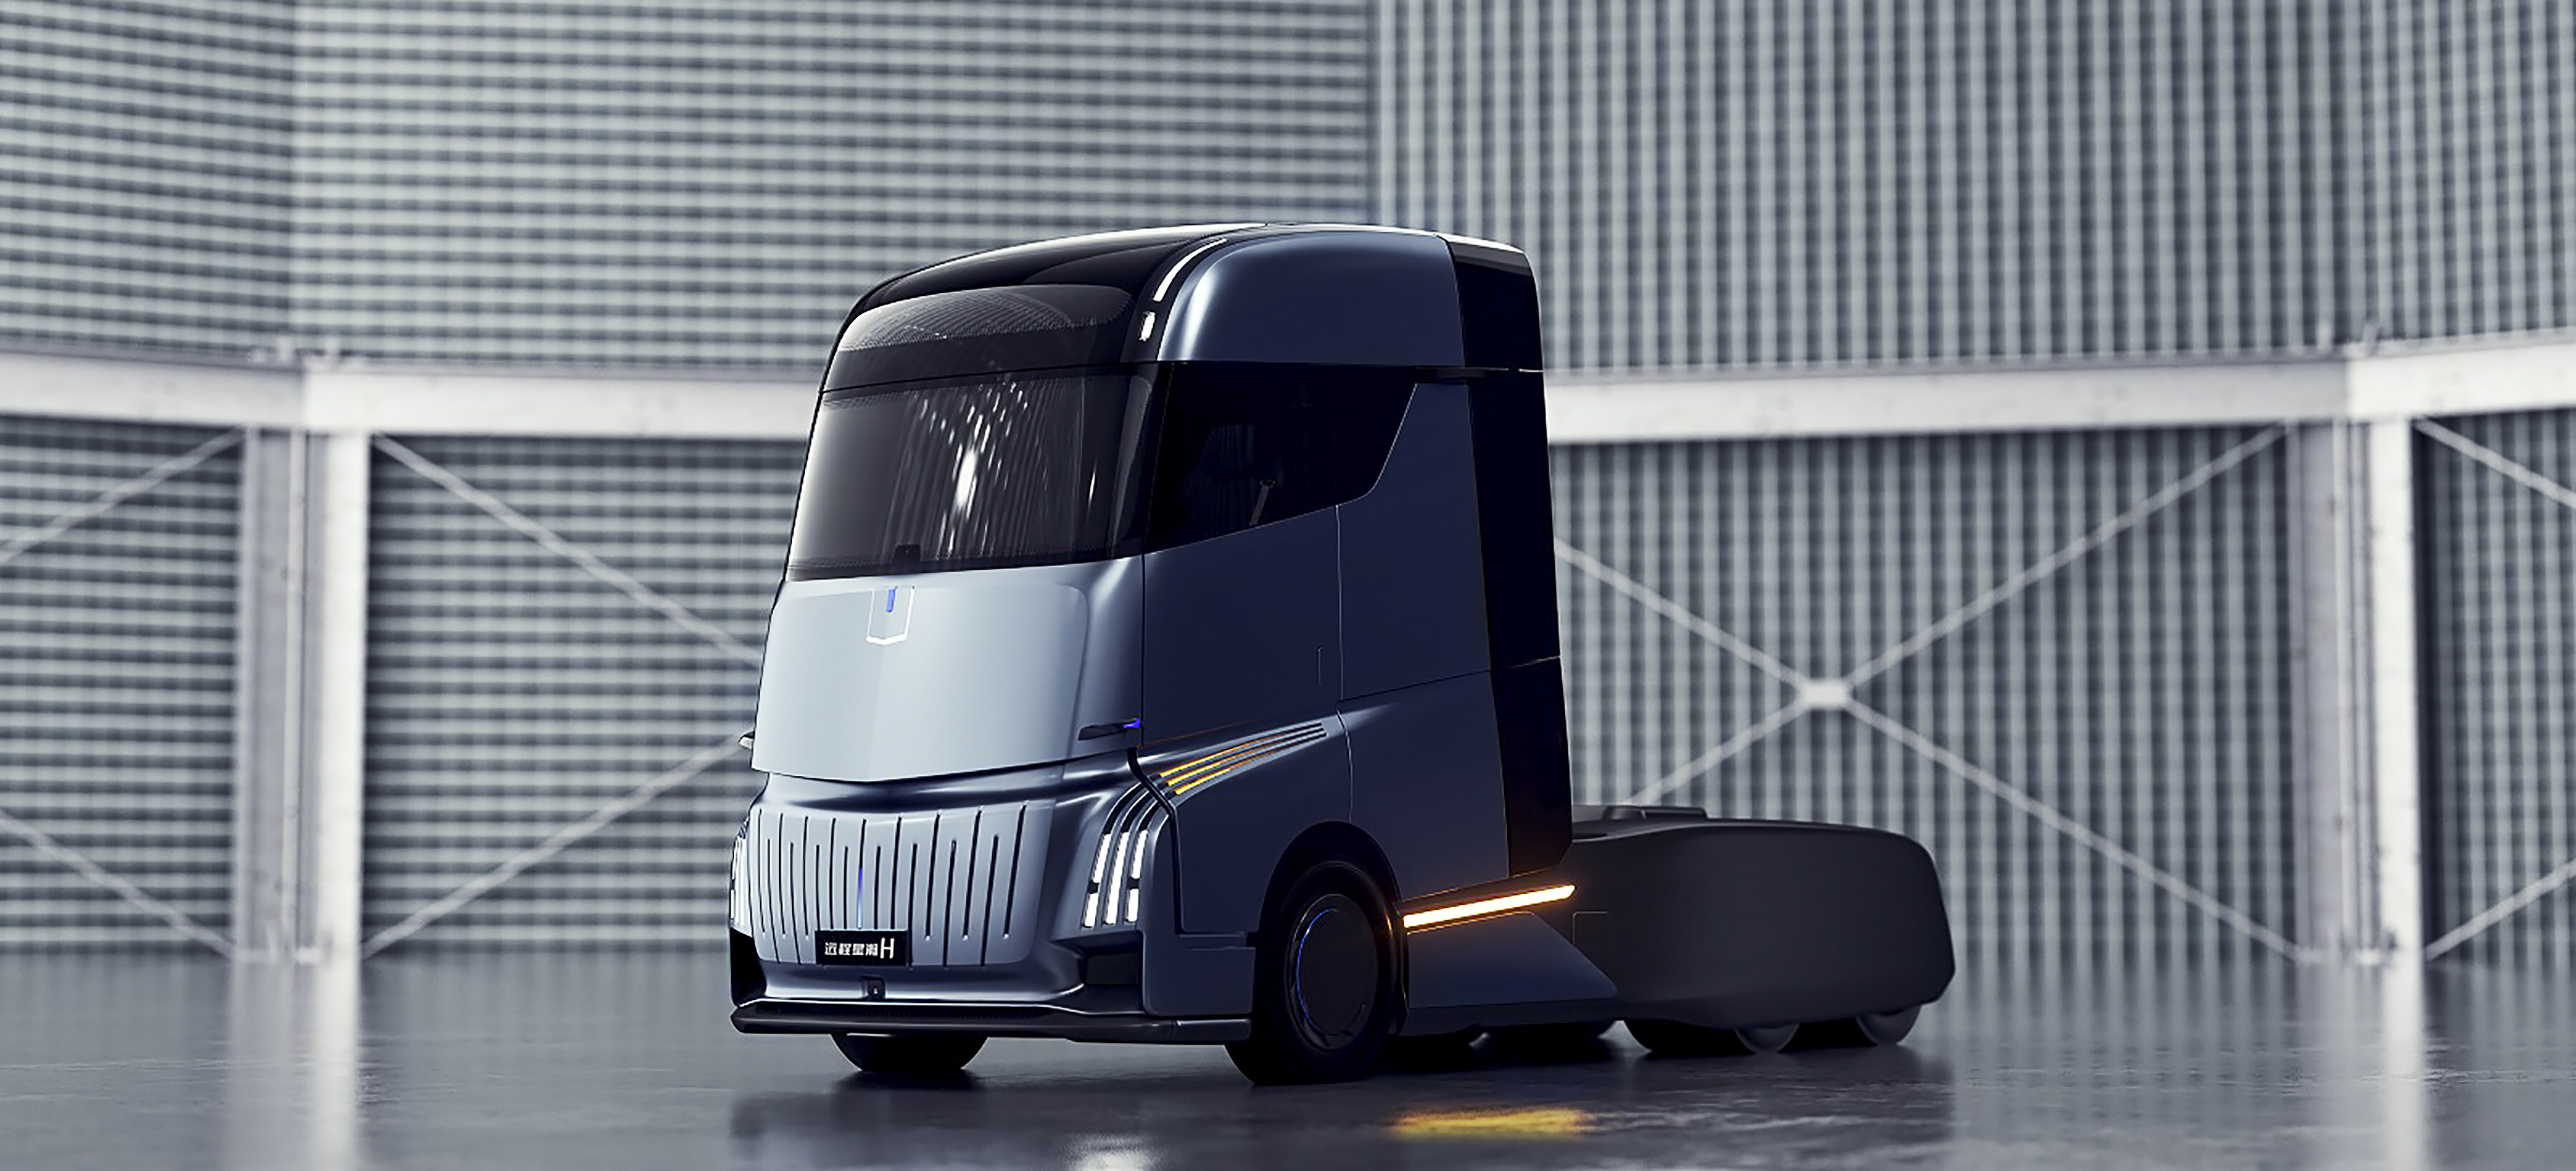 An electric truck from Geely. Photo: Handout 